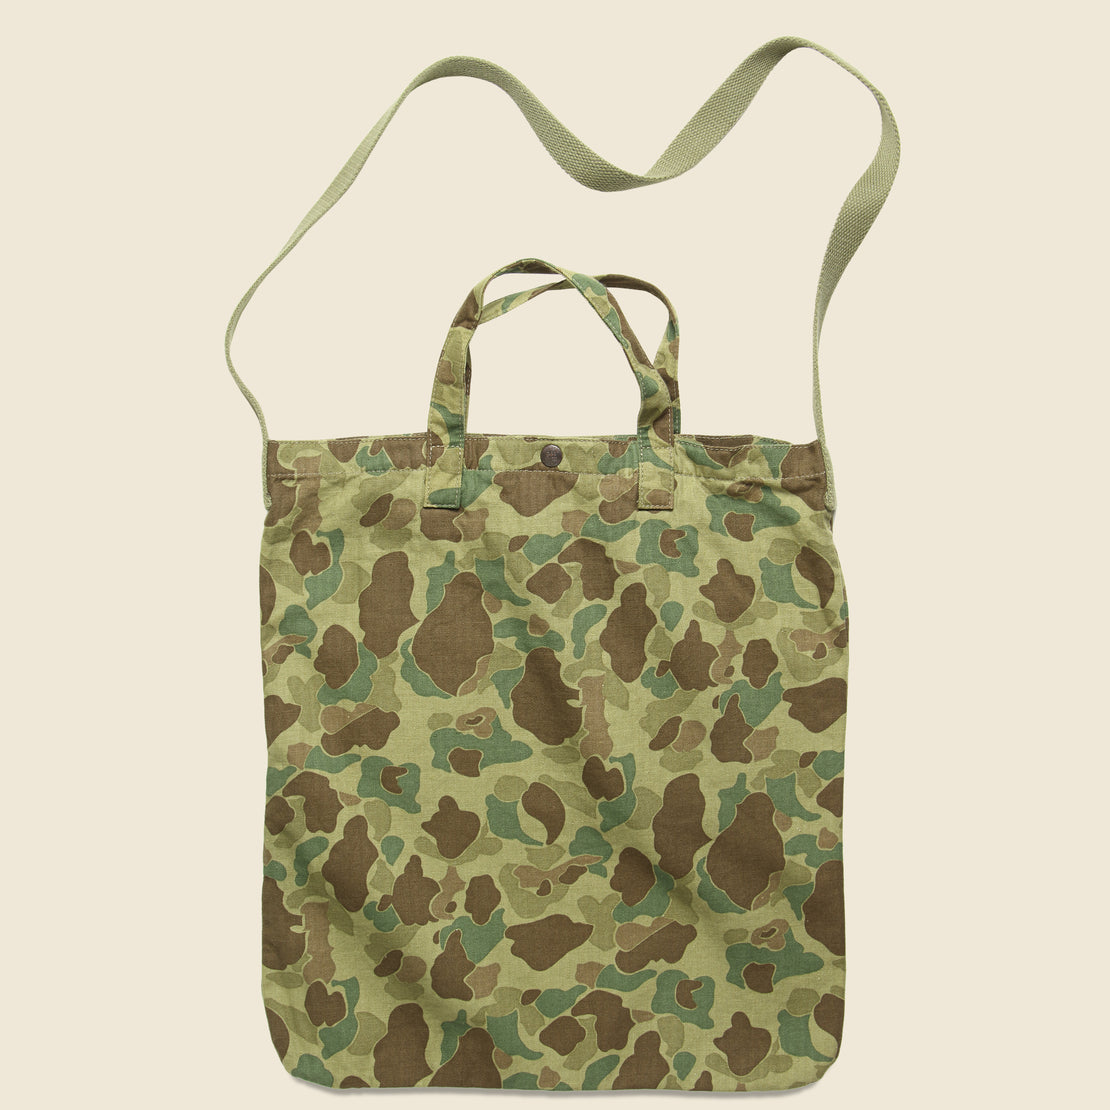 Market Tote Bag - Frog Skin Camo - RRL - STAG Provisions - Accessories - Bags / Luggage